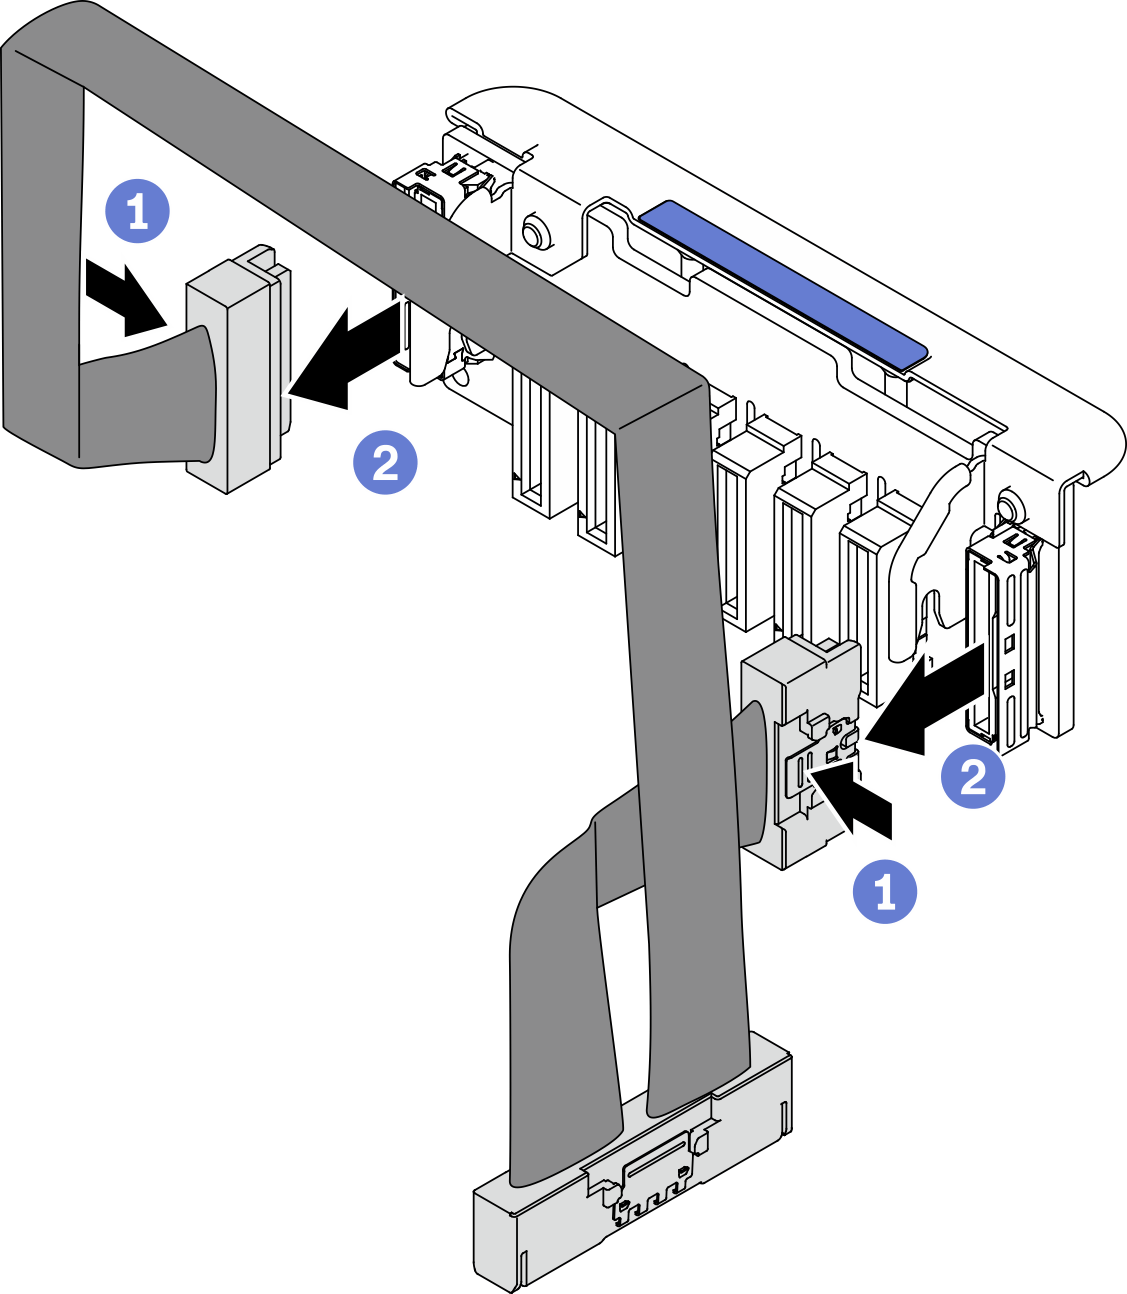 Disconnecting cable from EDSFF backplane